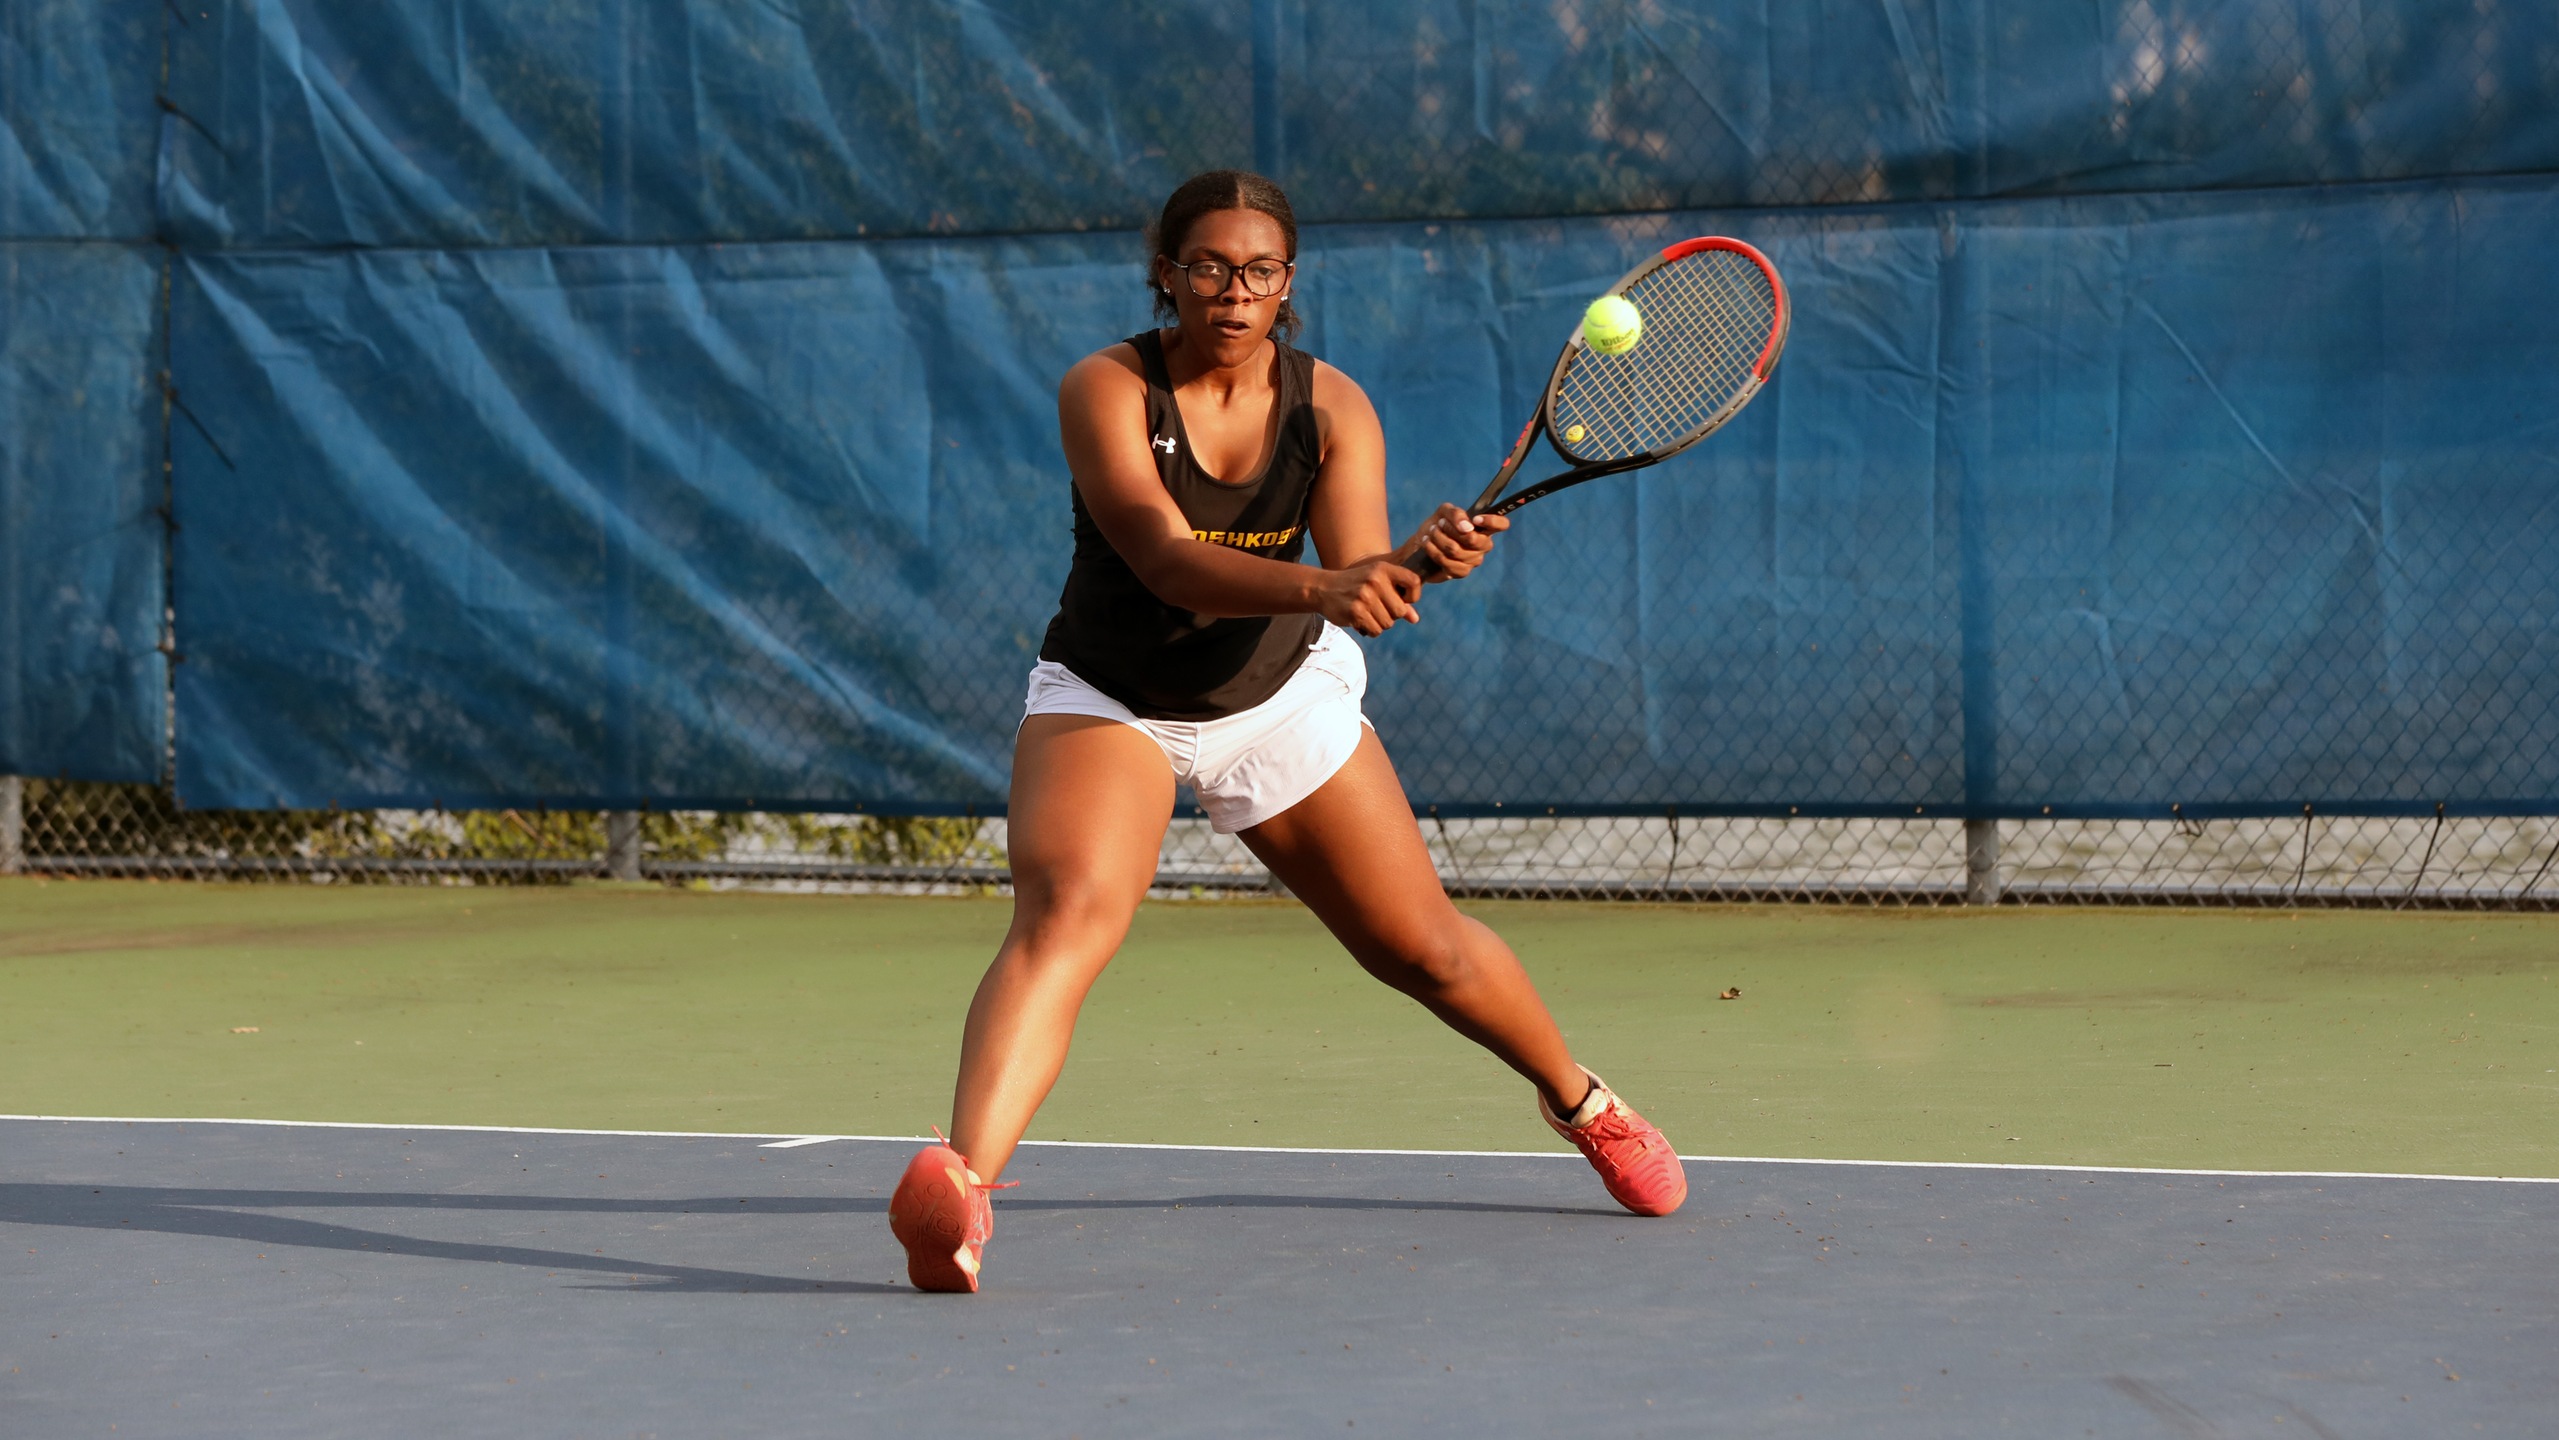 Michelle Spicer earned a 6-1, 6-1 victory for the Titans at No. 1 singles against the Vikings.